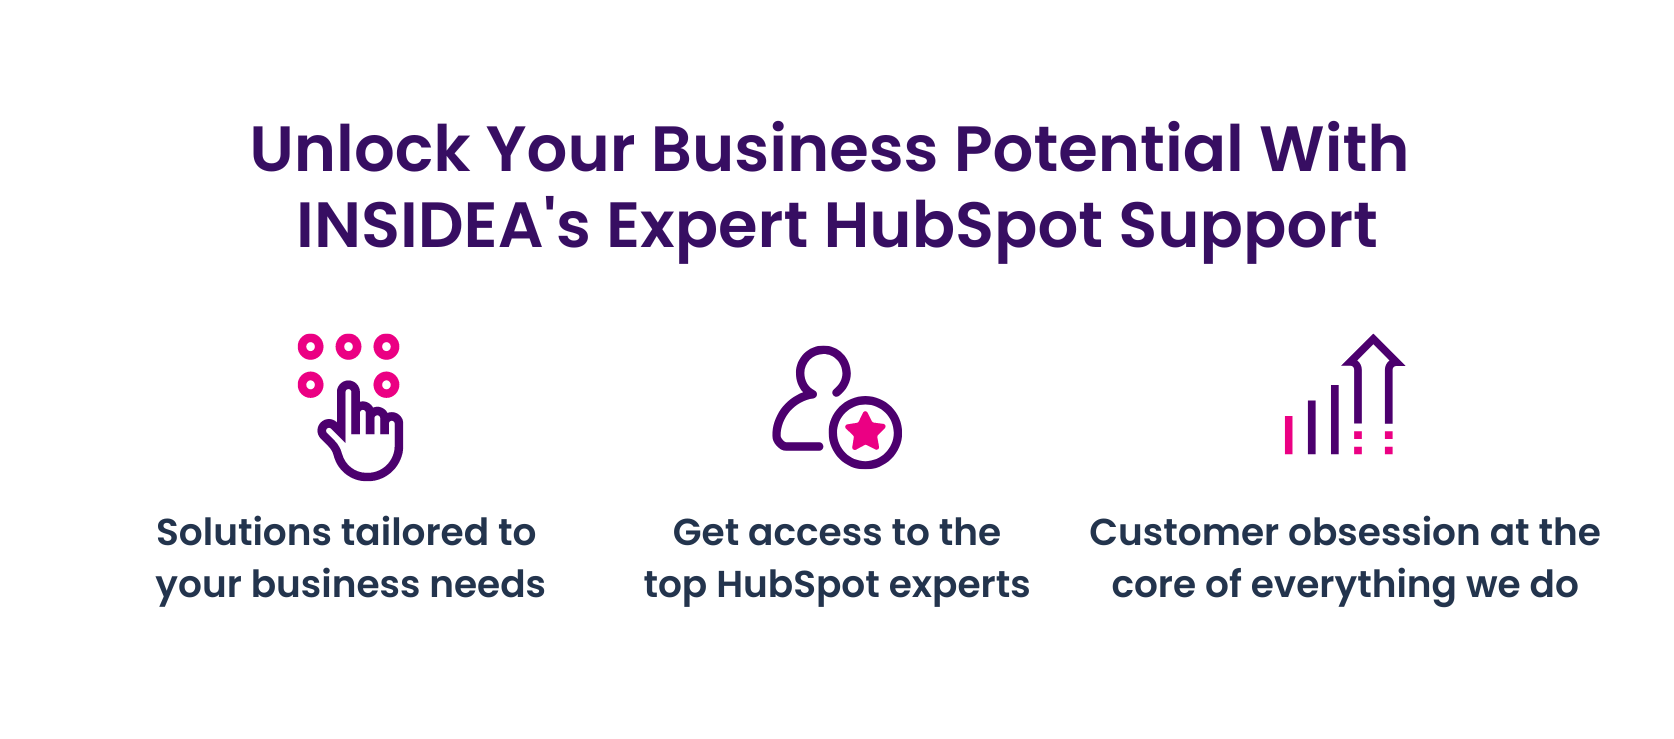 Unlock Your Business Potential with INSIDEA's HubSpot services